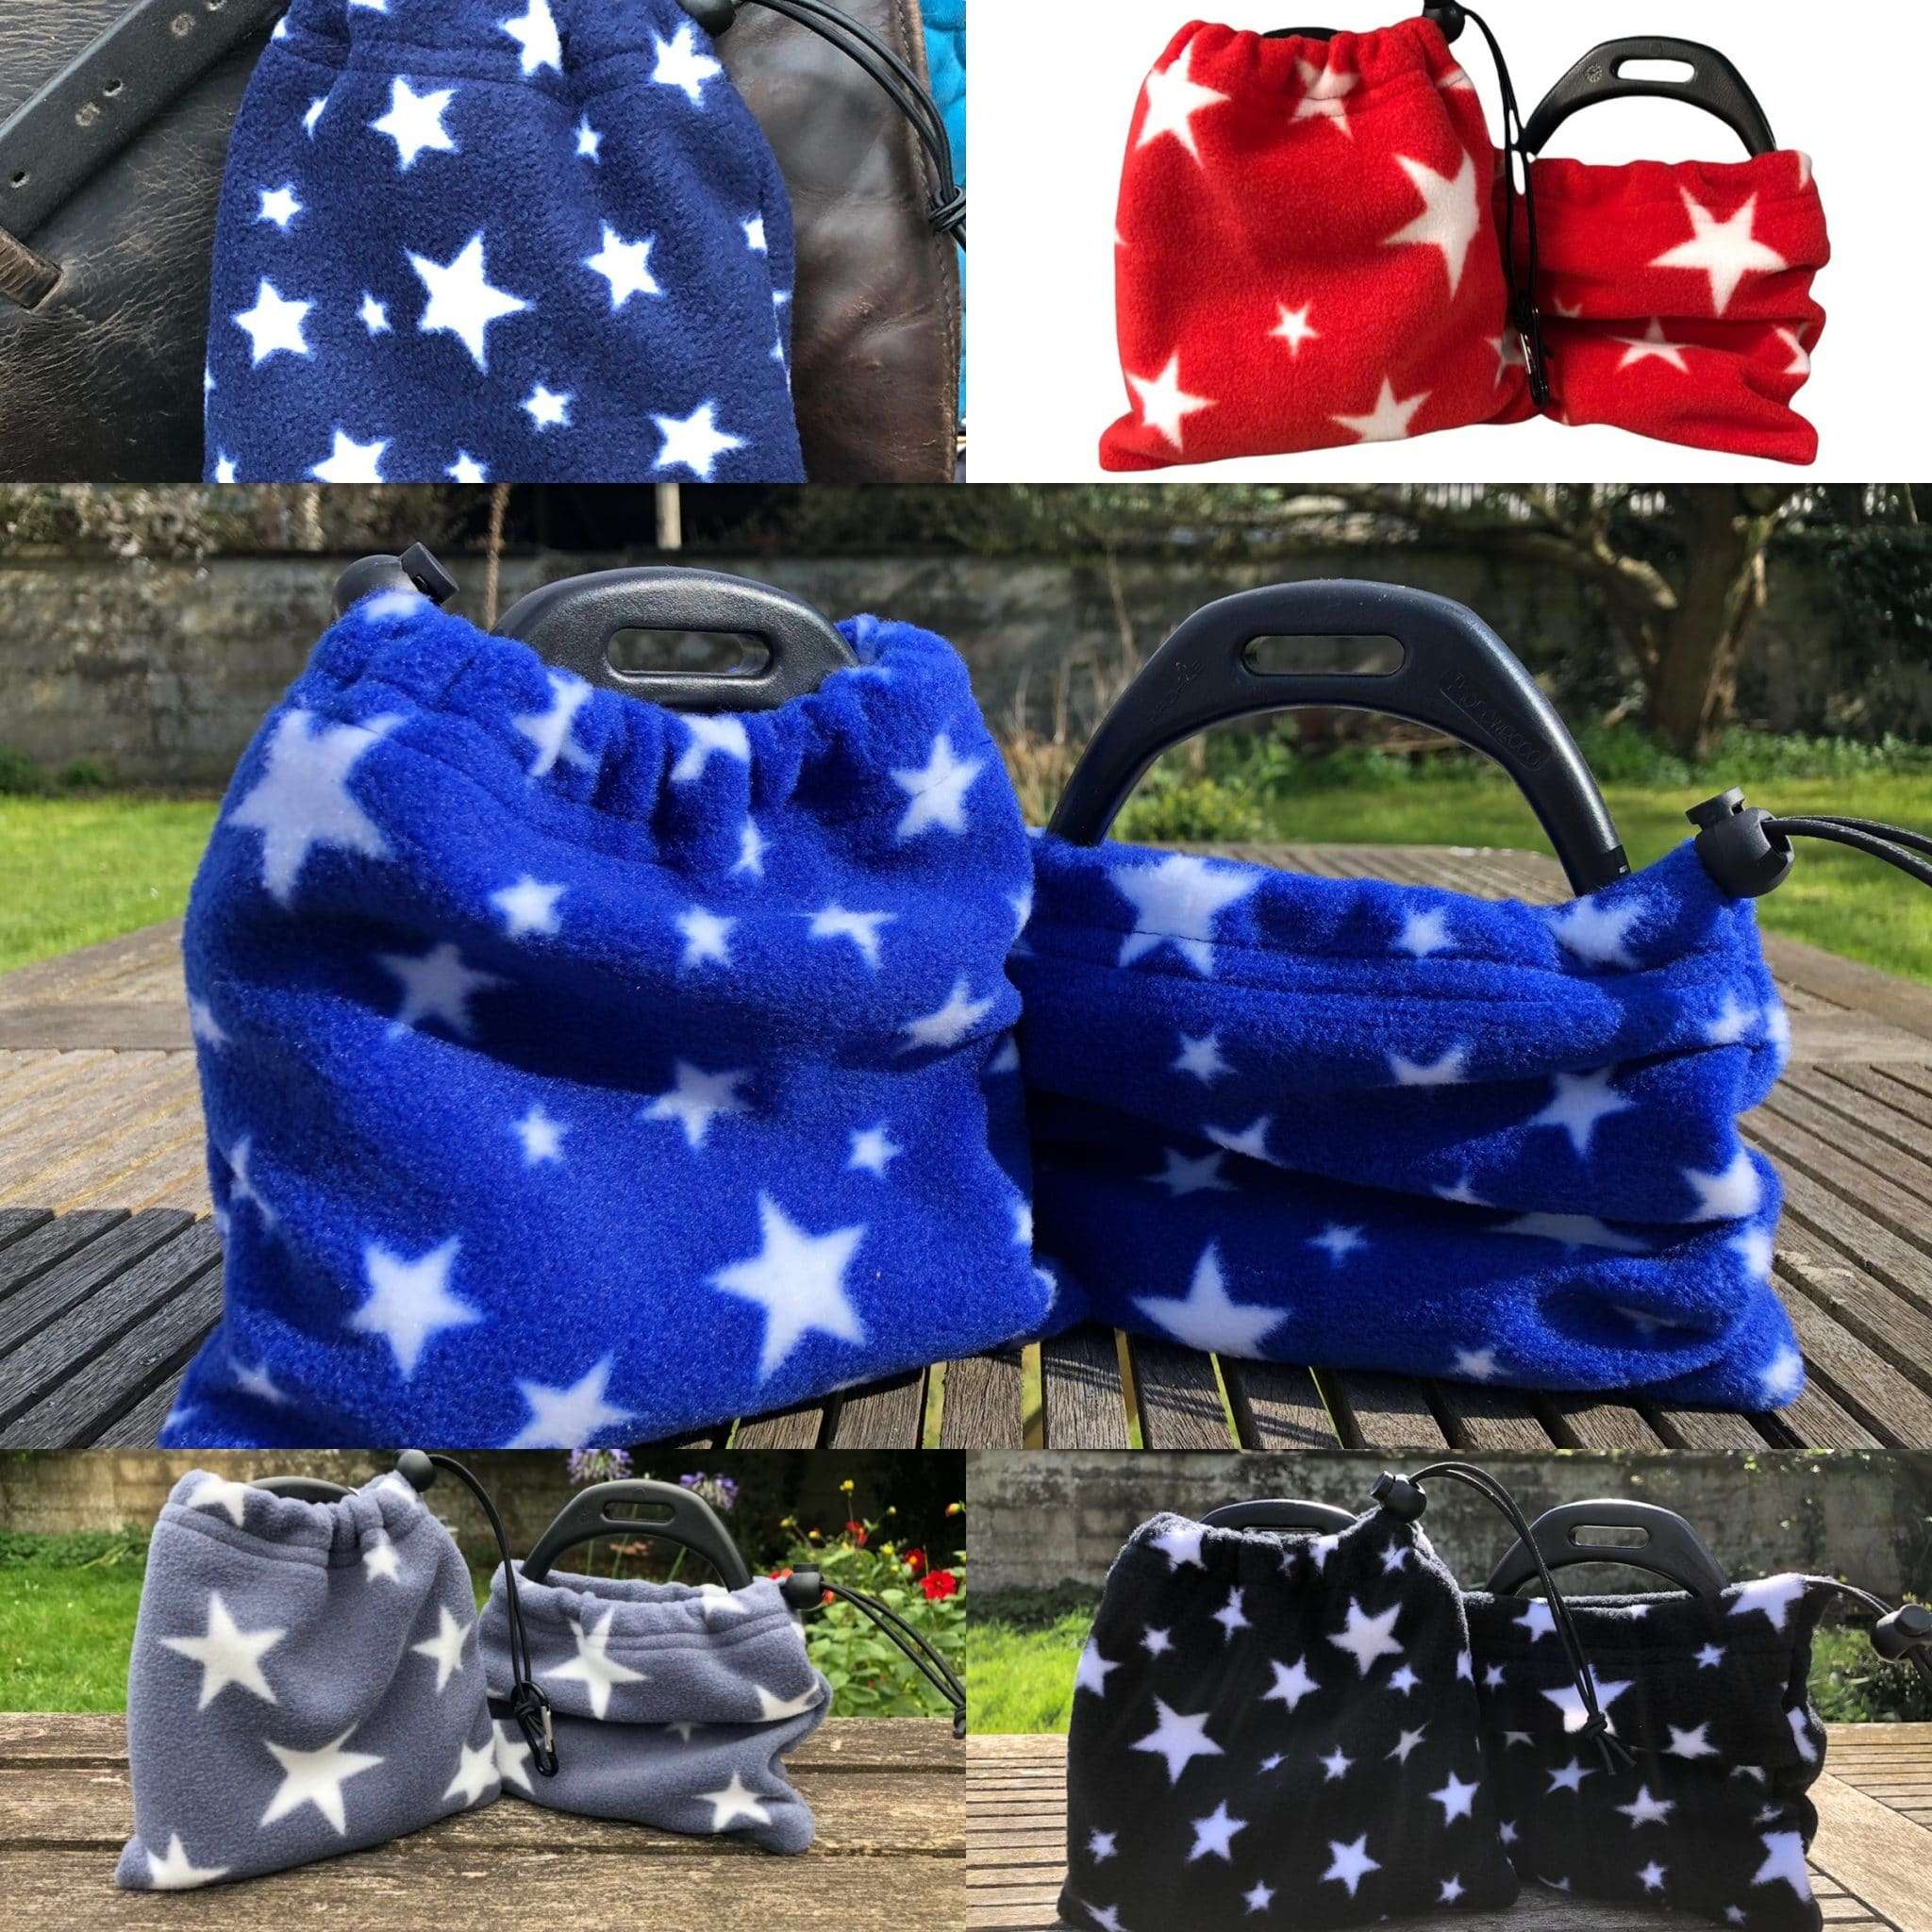 IMG 3881 scaled Fleece Stirrup Covers - Stars Help protect your saddle from dirt and scratches from the stirrups. Approx 7x7 inches Items posted within 1-3 working days. Shipped using Royal Mail 2nd Class. Back orders allow an extra 7 - 8 working days.